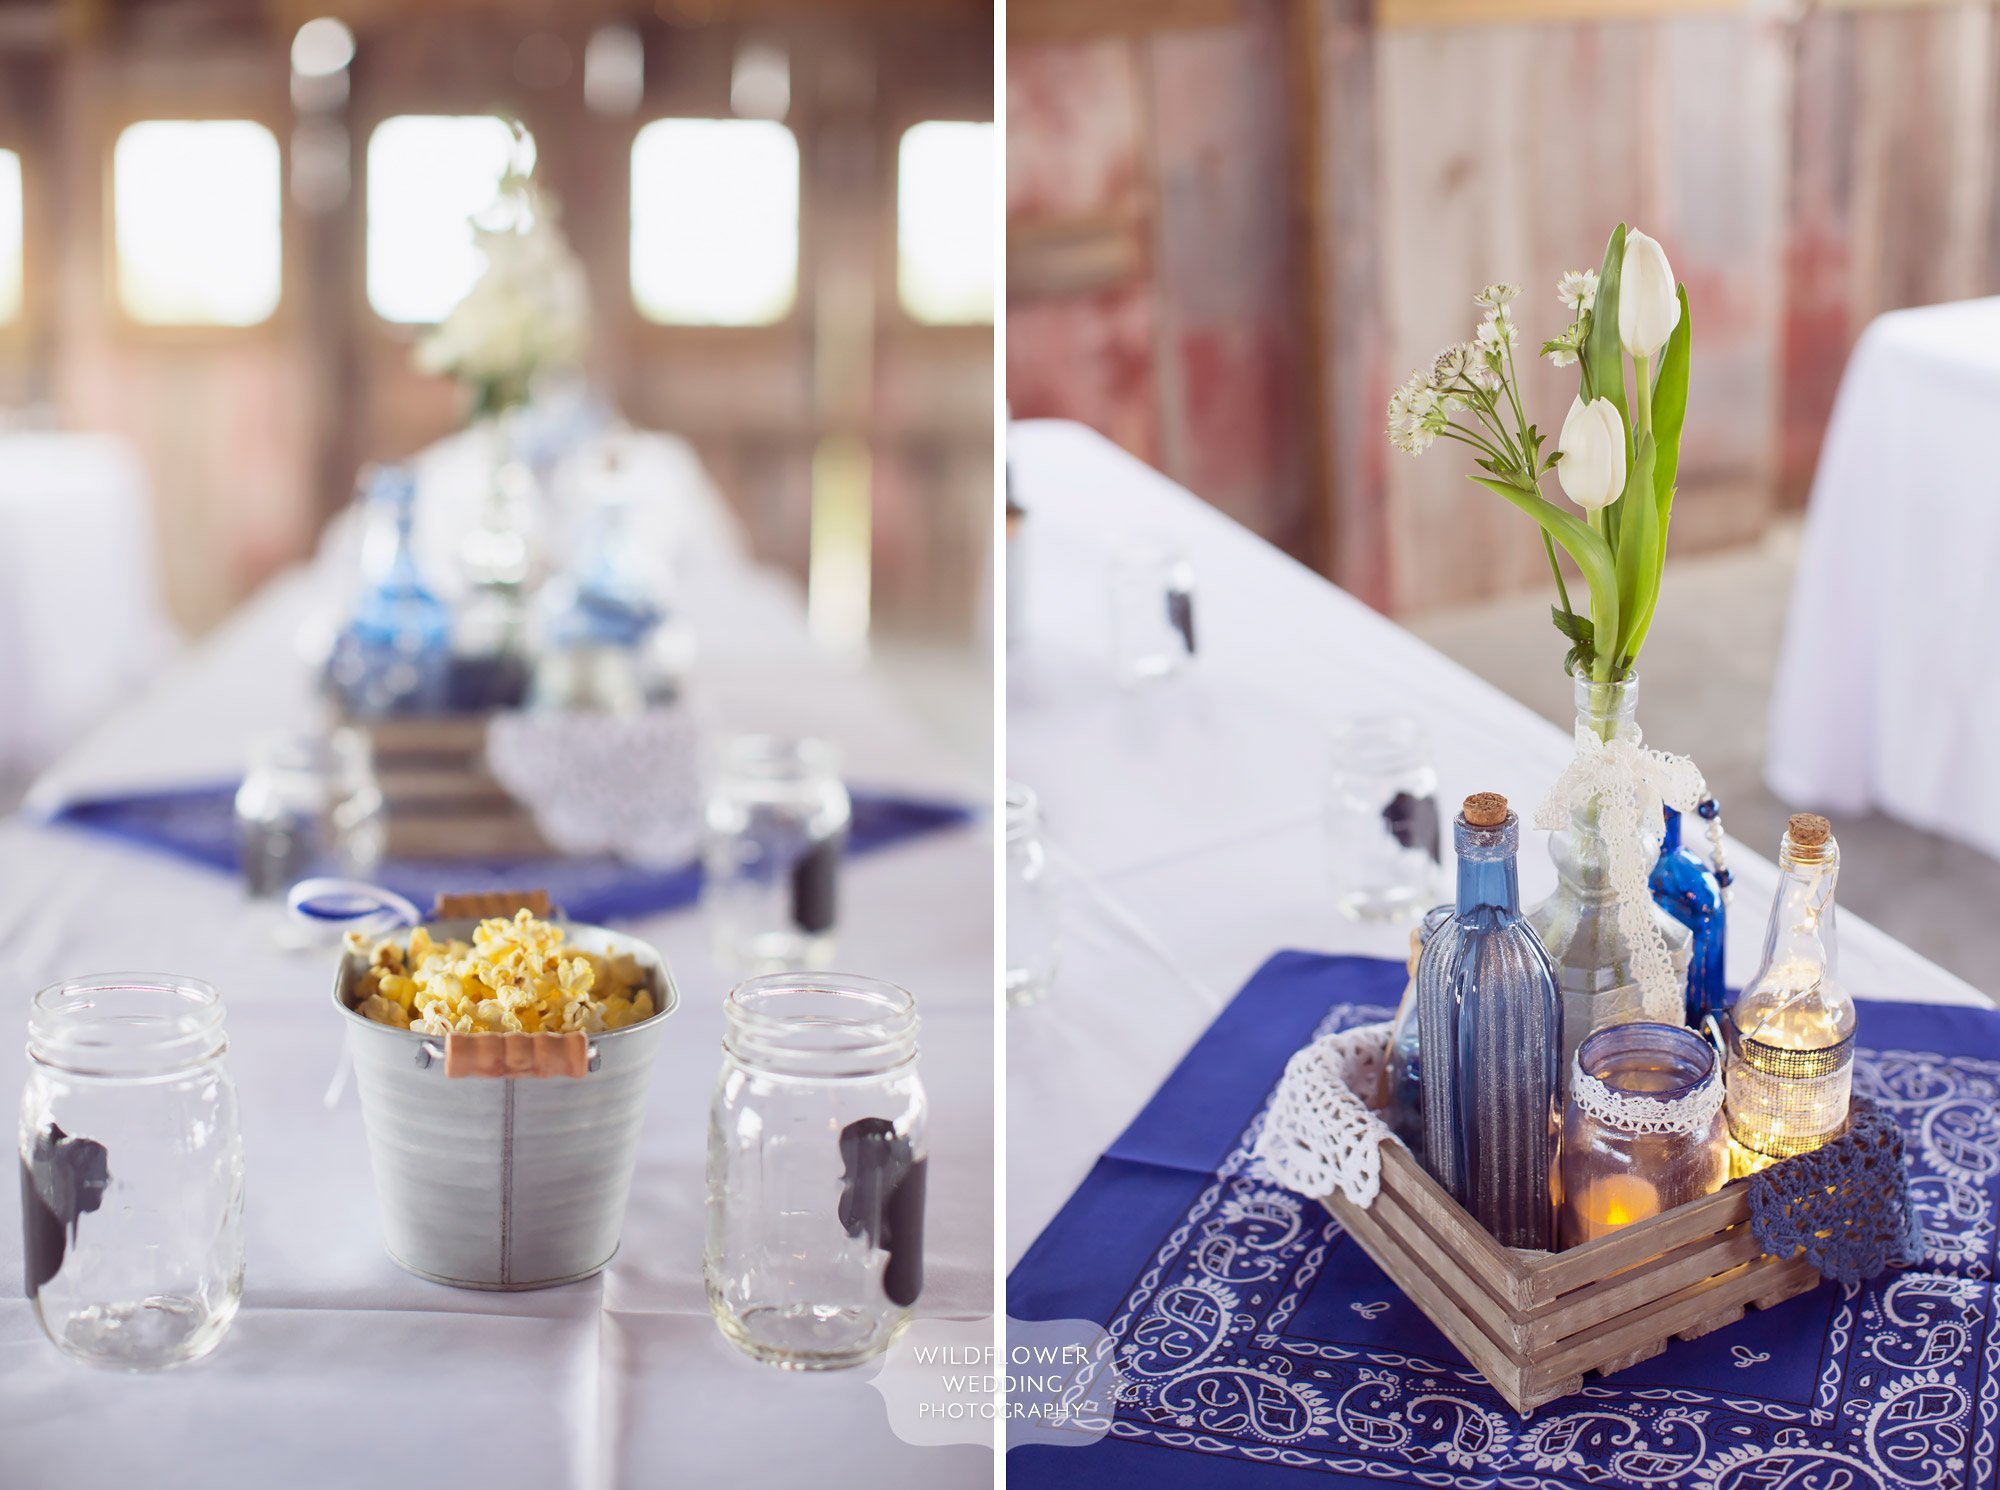 Cool idea for edible wedding centerpieces using galvanized bins at this barn wedding north of KC.